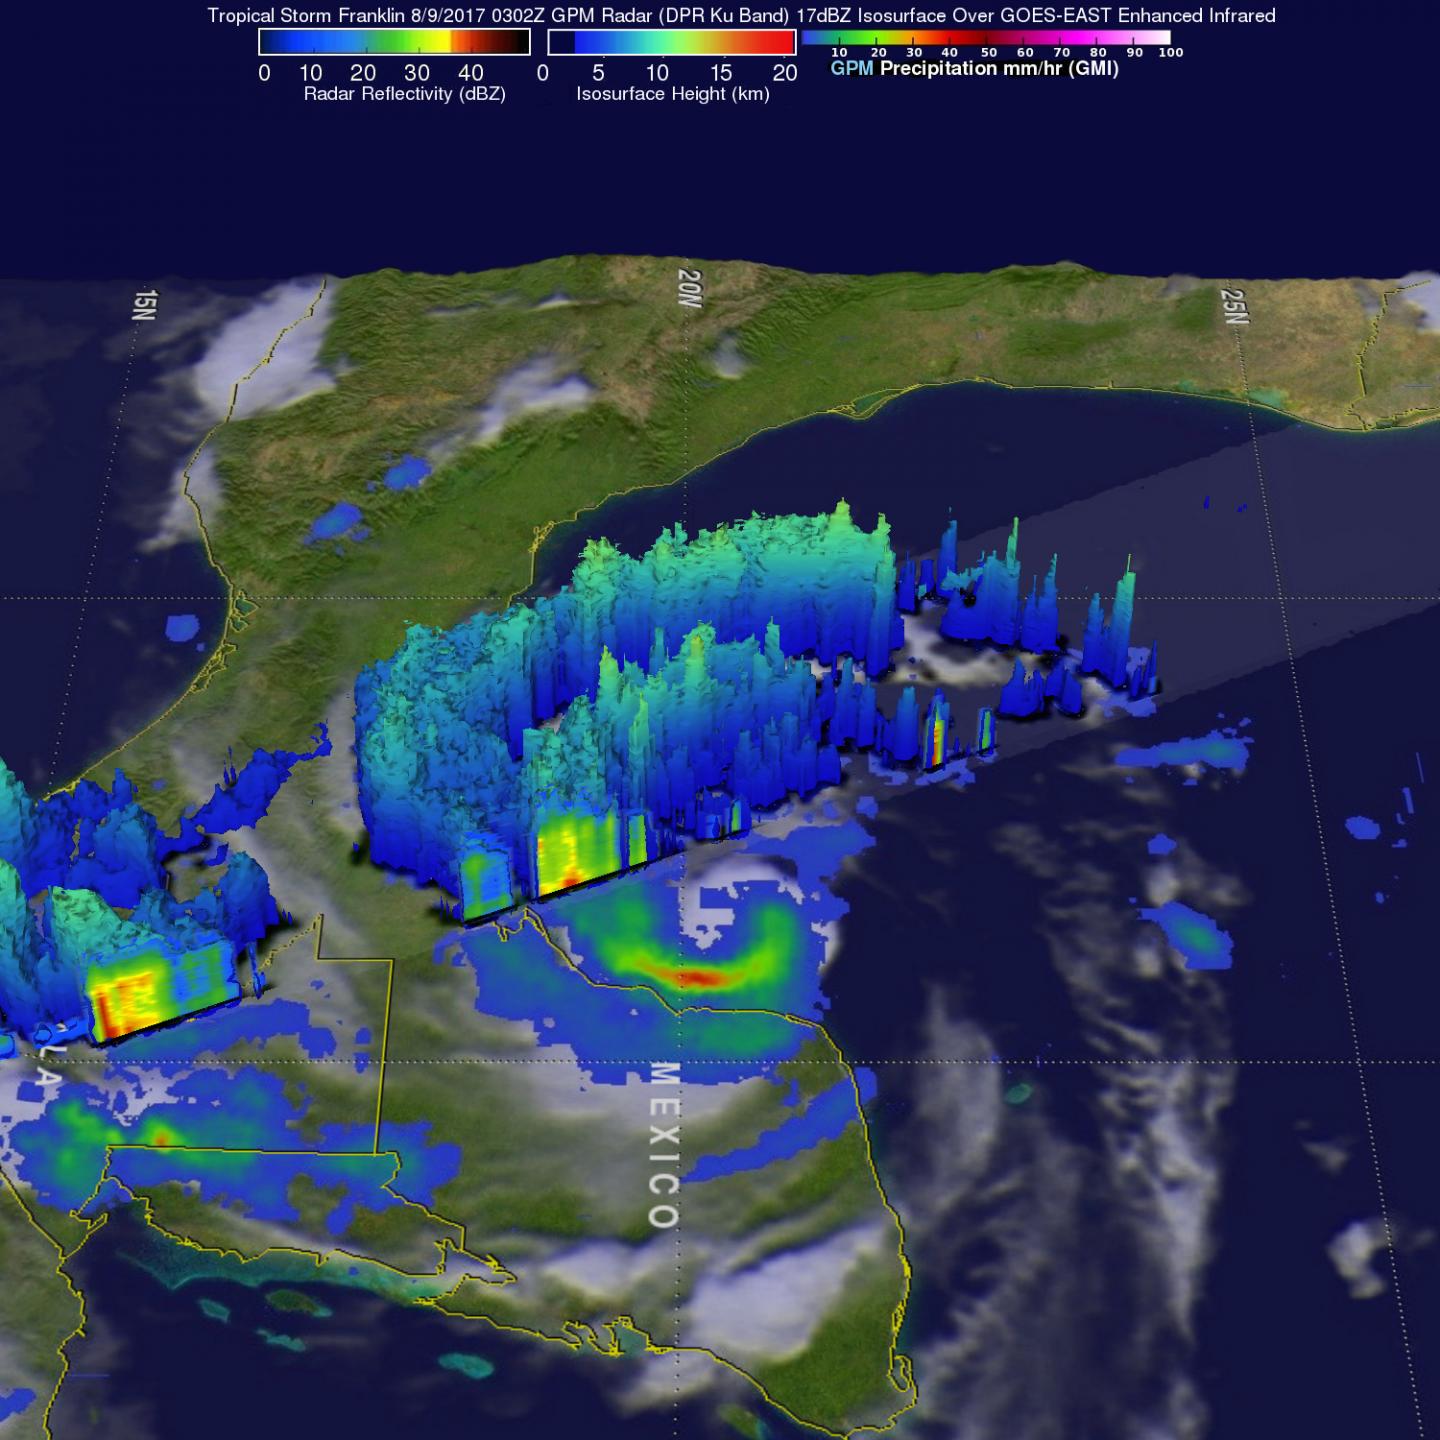 GPM Image of Franklin